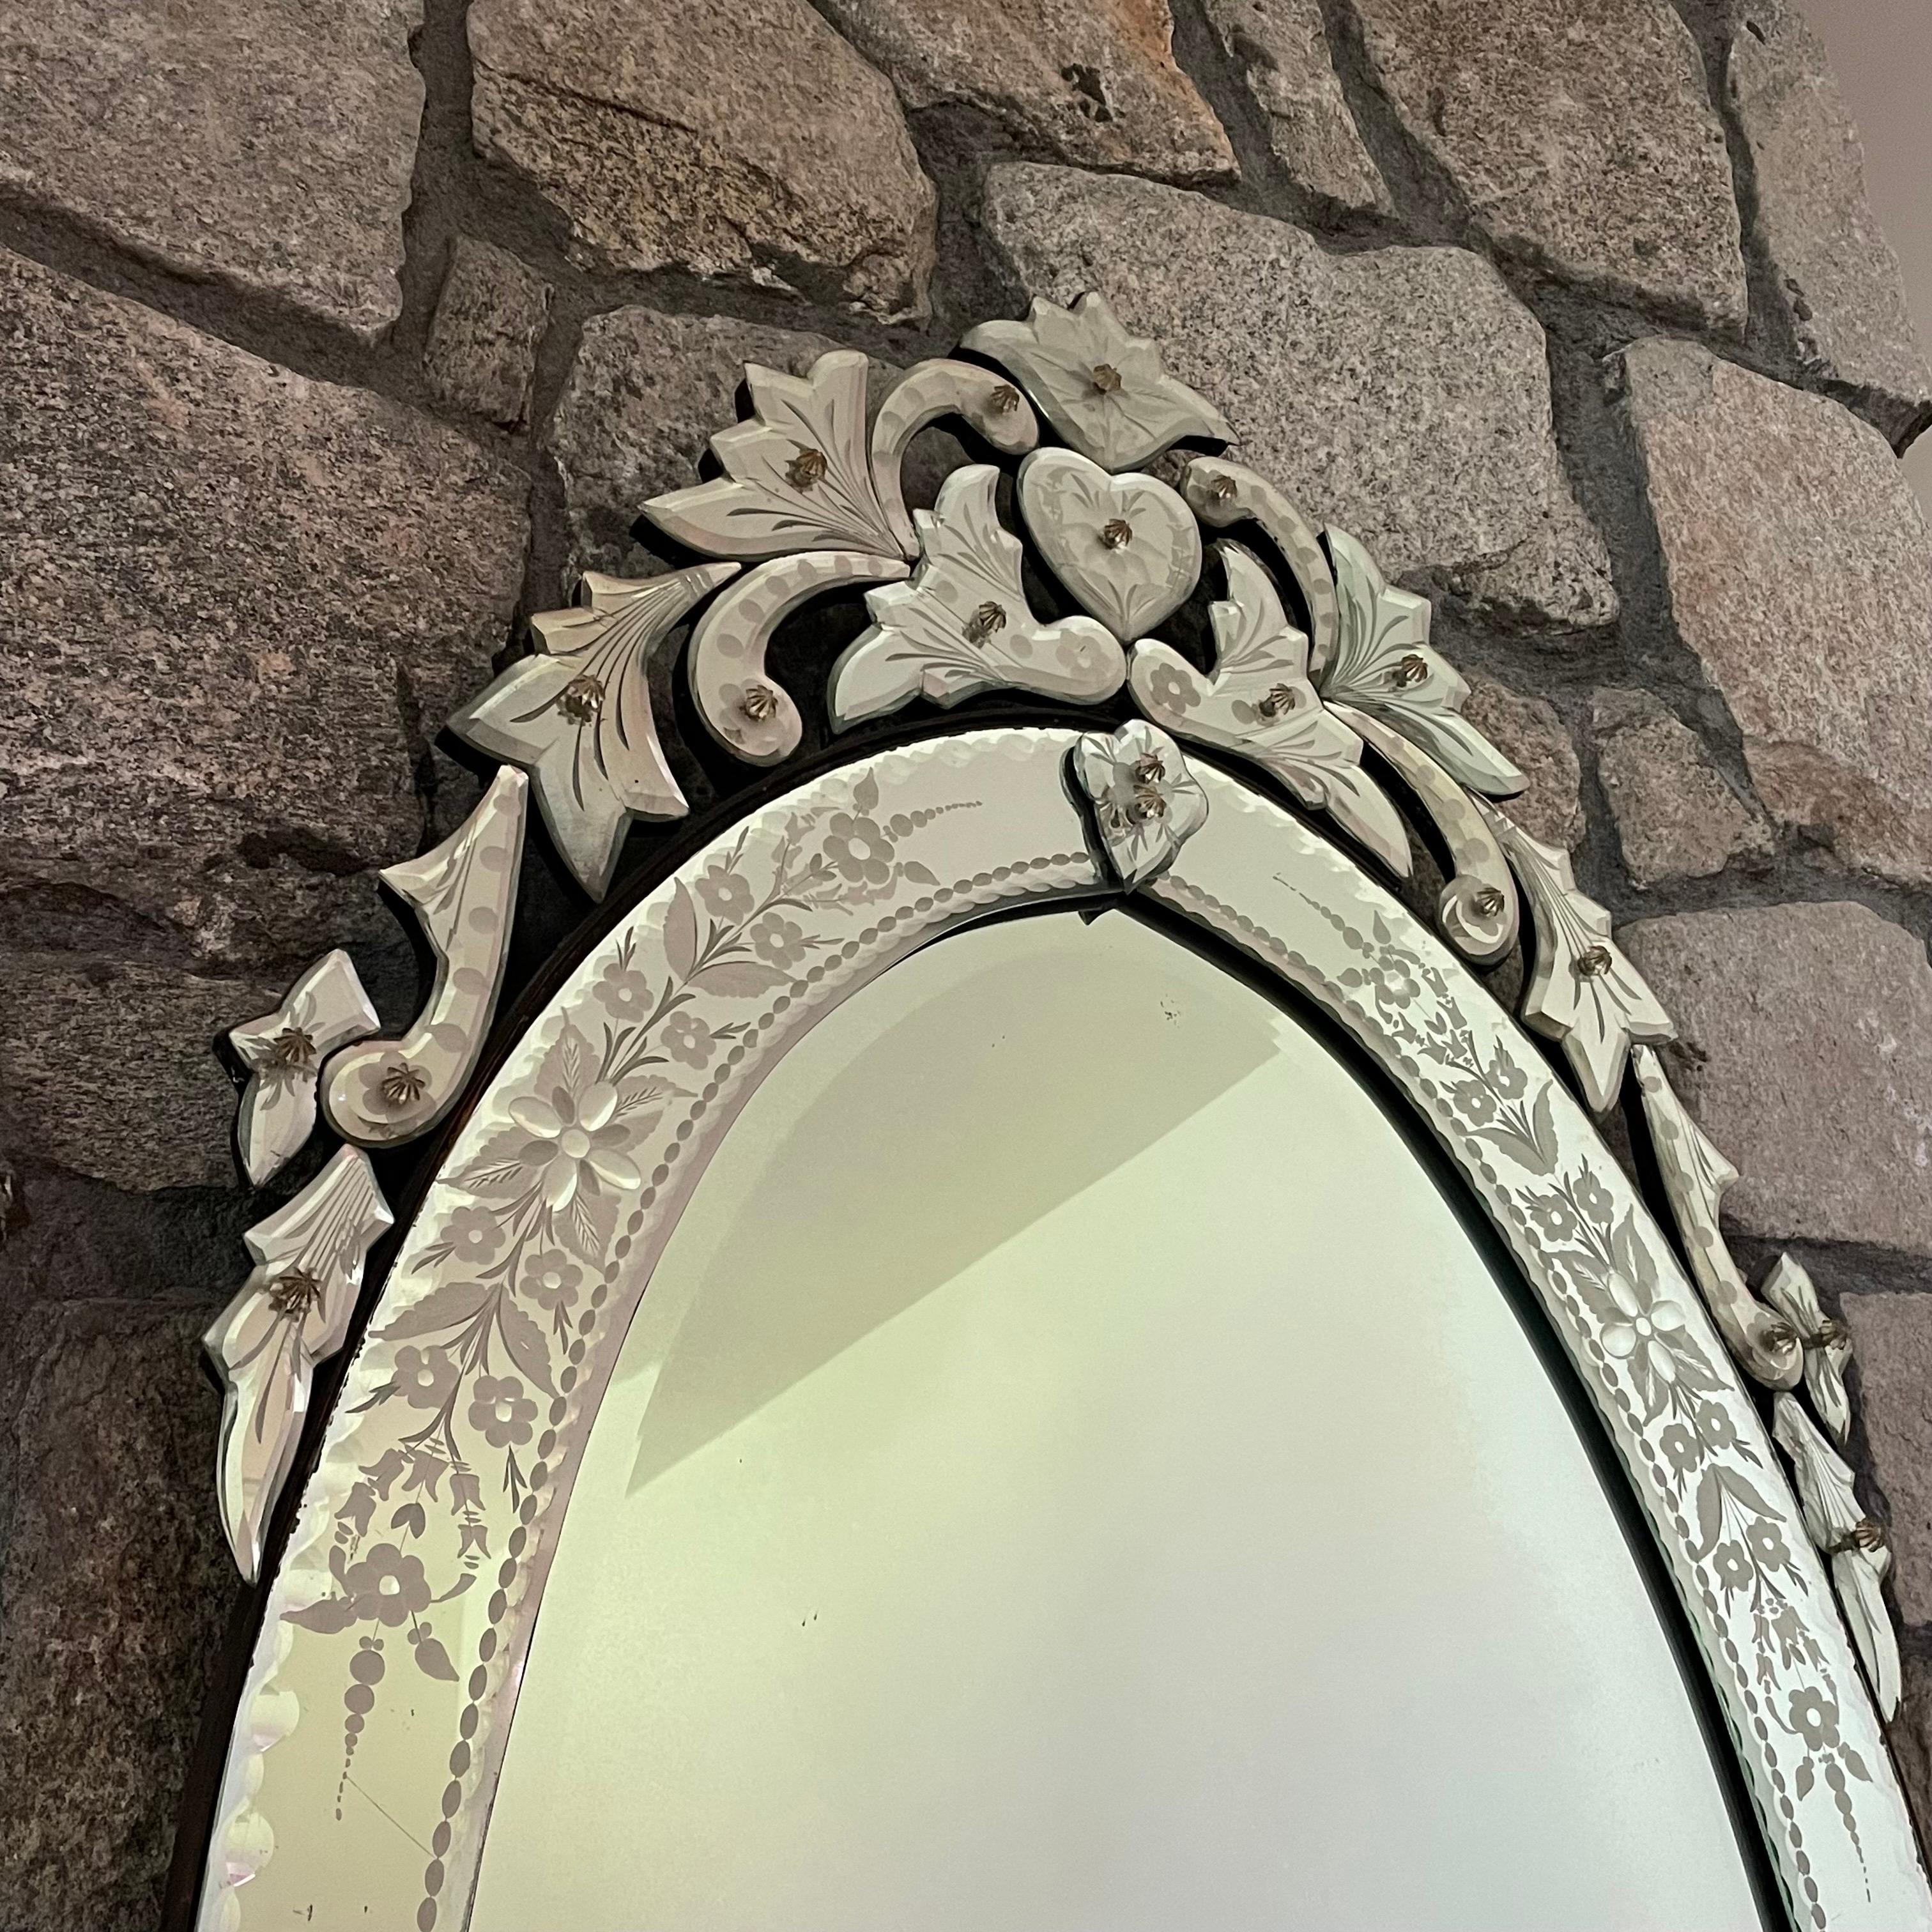 Rococo Revival Early 20th Century Oval Venetian Mirror, Italy   For Sale